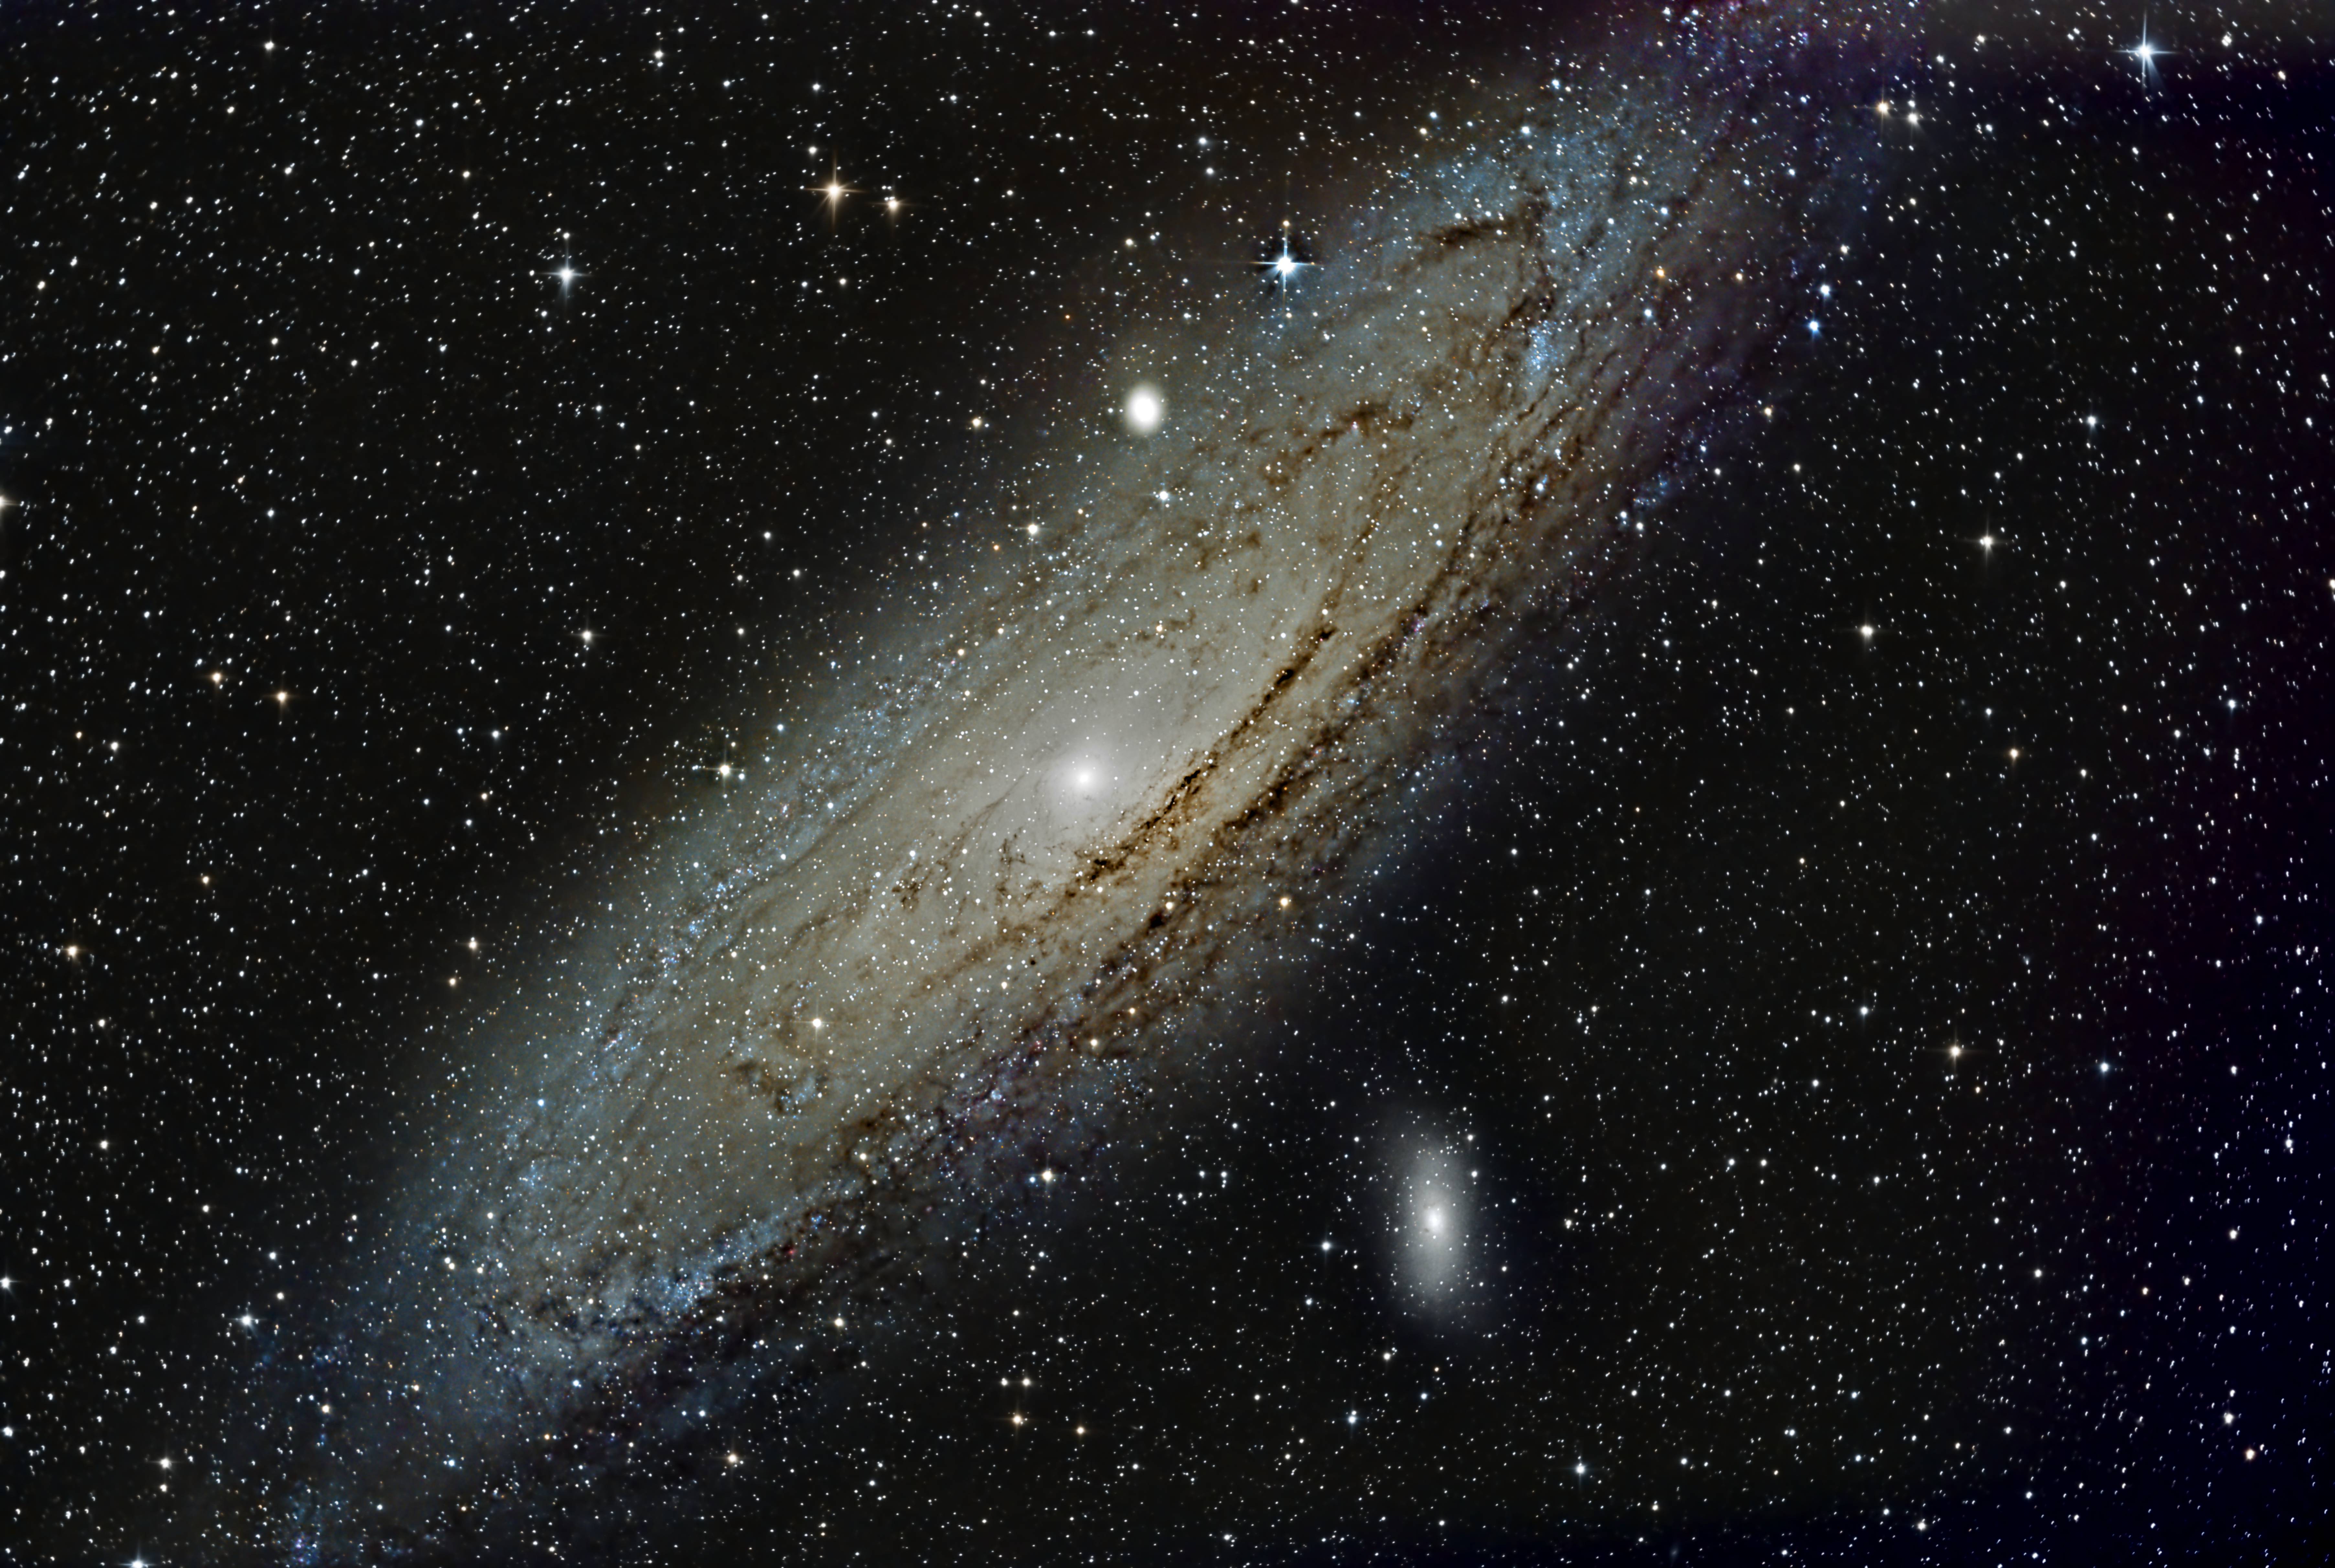 Andromeda Galaxy, M31 - Astrophotography by galacticsights